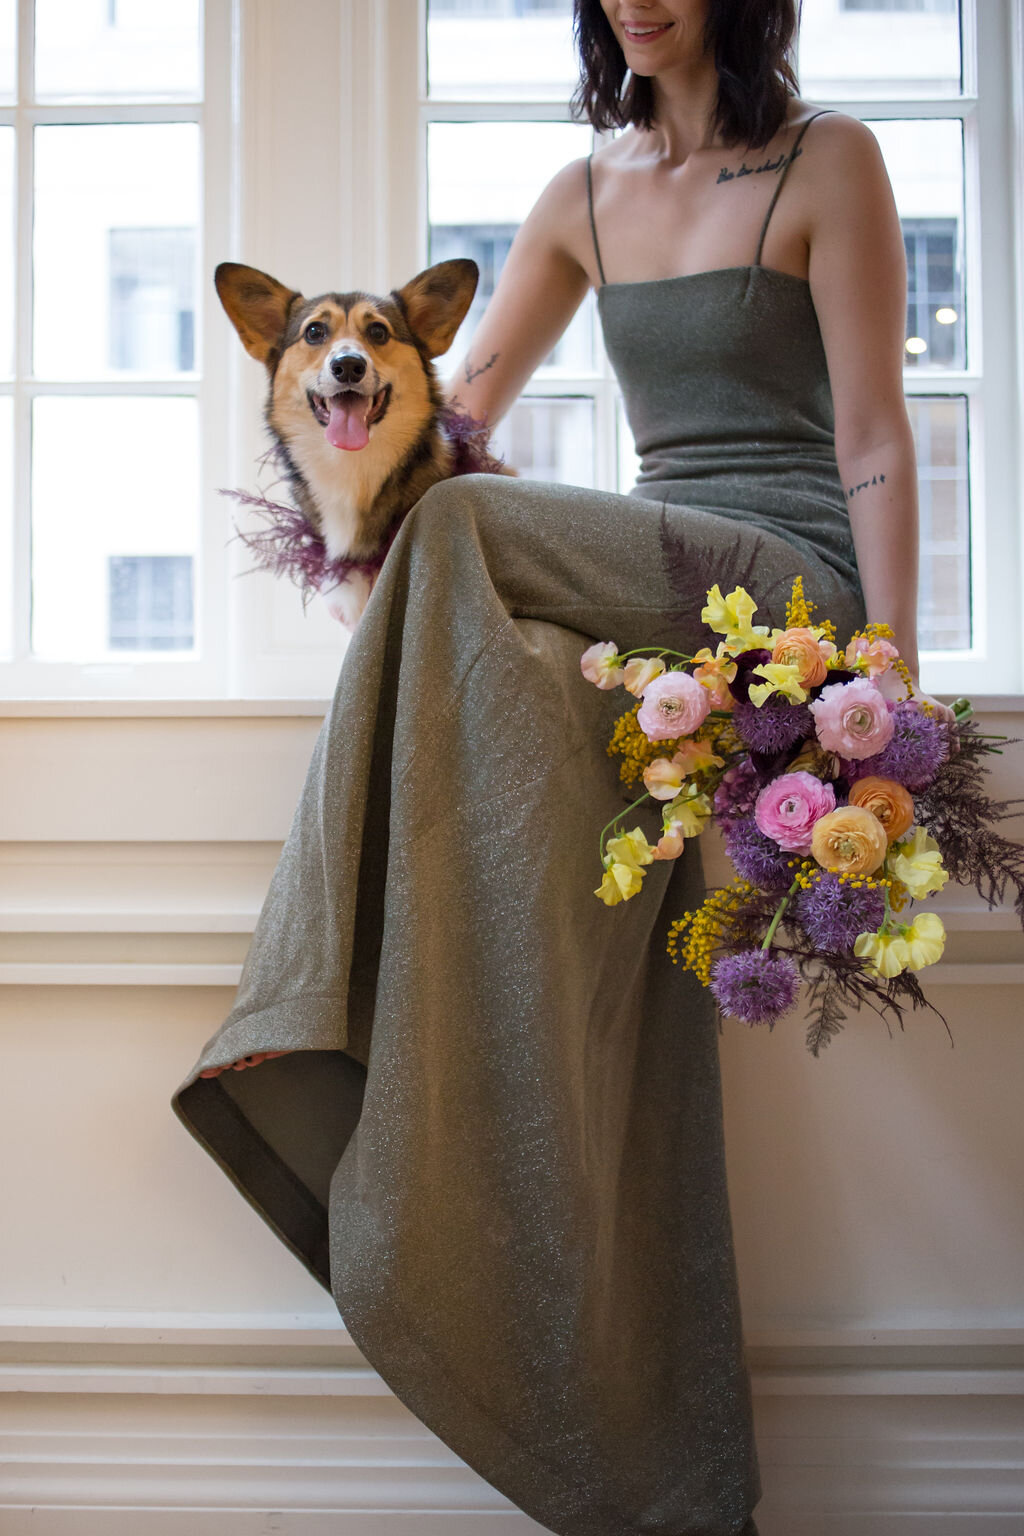 Modern, colorful bridal bouquet with yellow sweet peas, purple allium, pink and peach ranunculus, golden acacia, and painted eggplant plums fern. Nashville wedding florist. Printer’s Alley portraits.